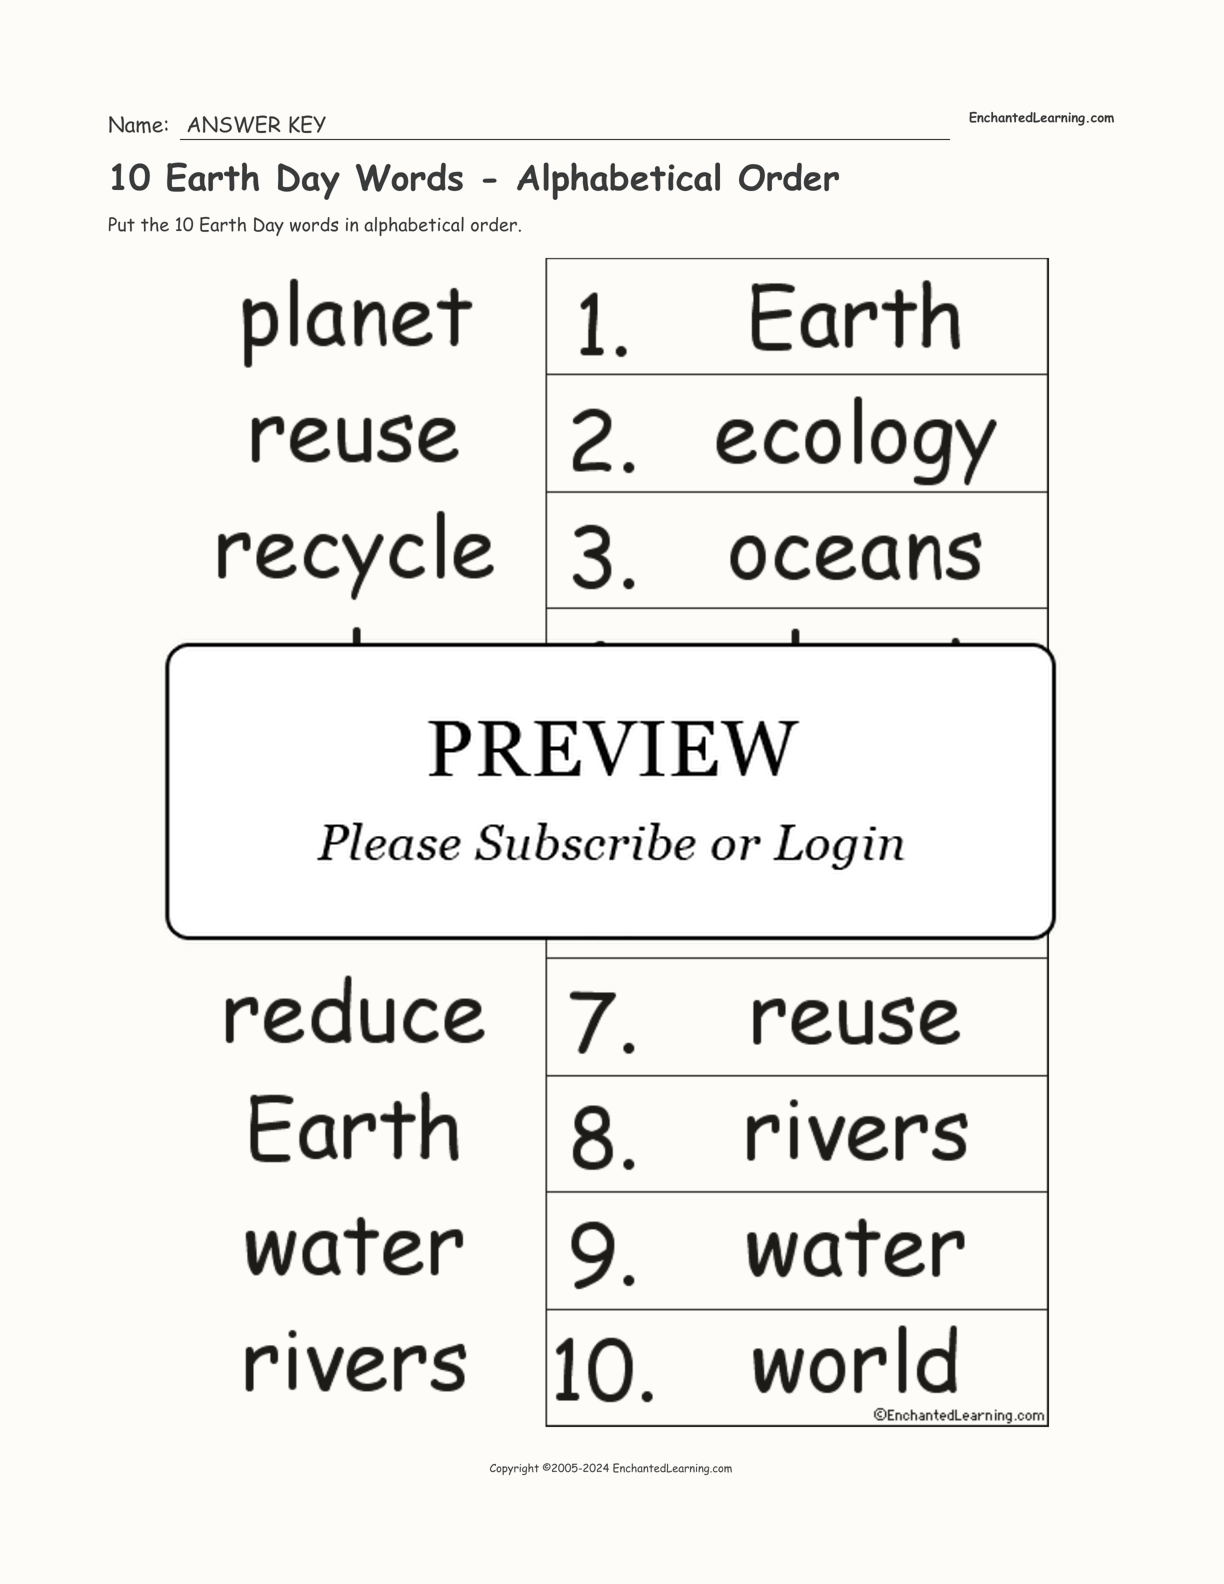 10 Earth Day Words - Alphabetical Order interactive worksheet page 2